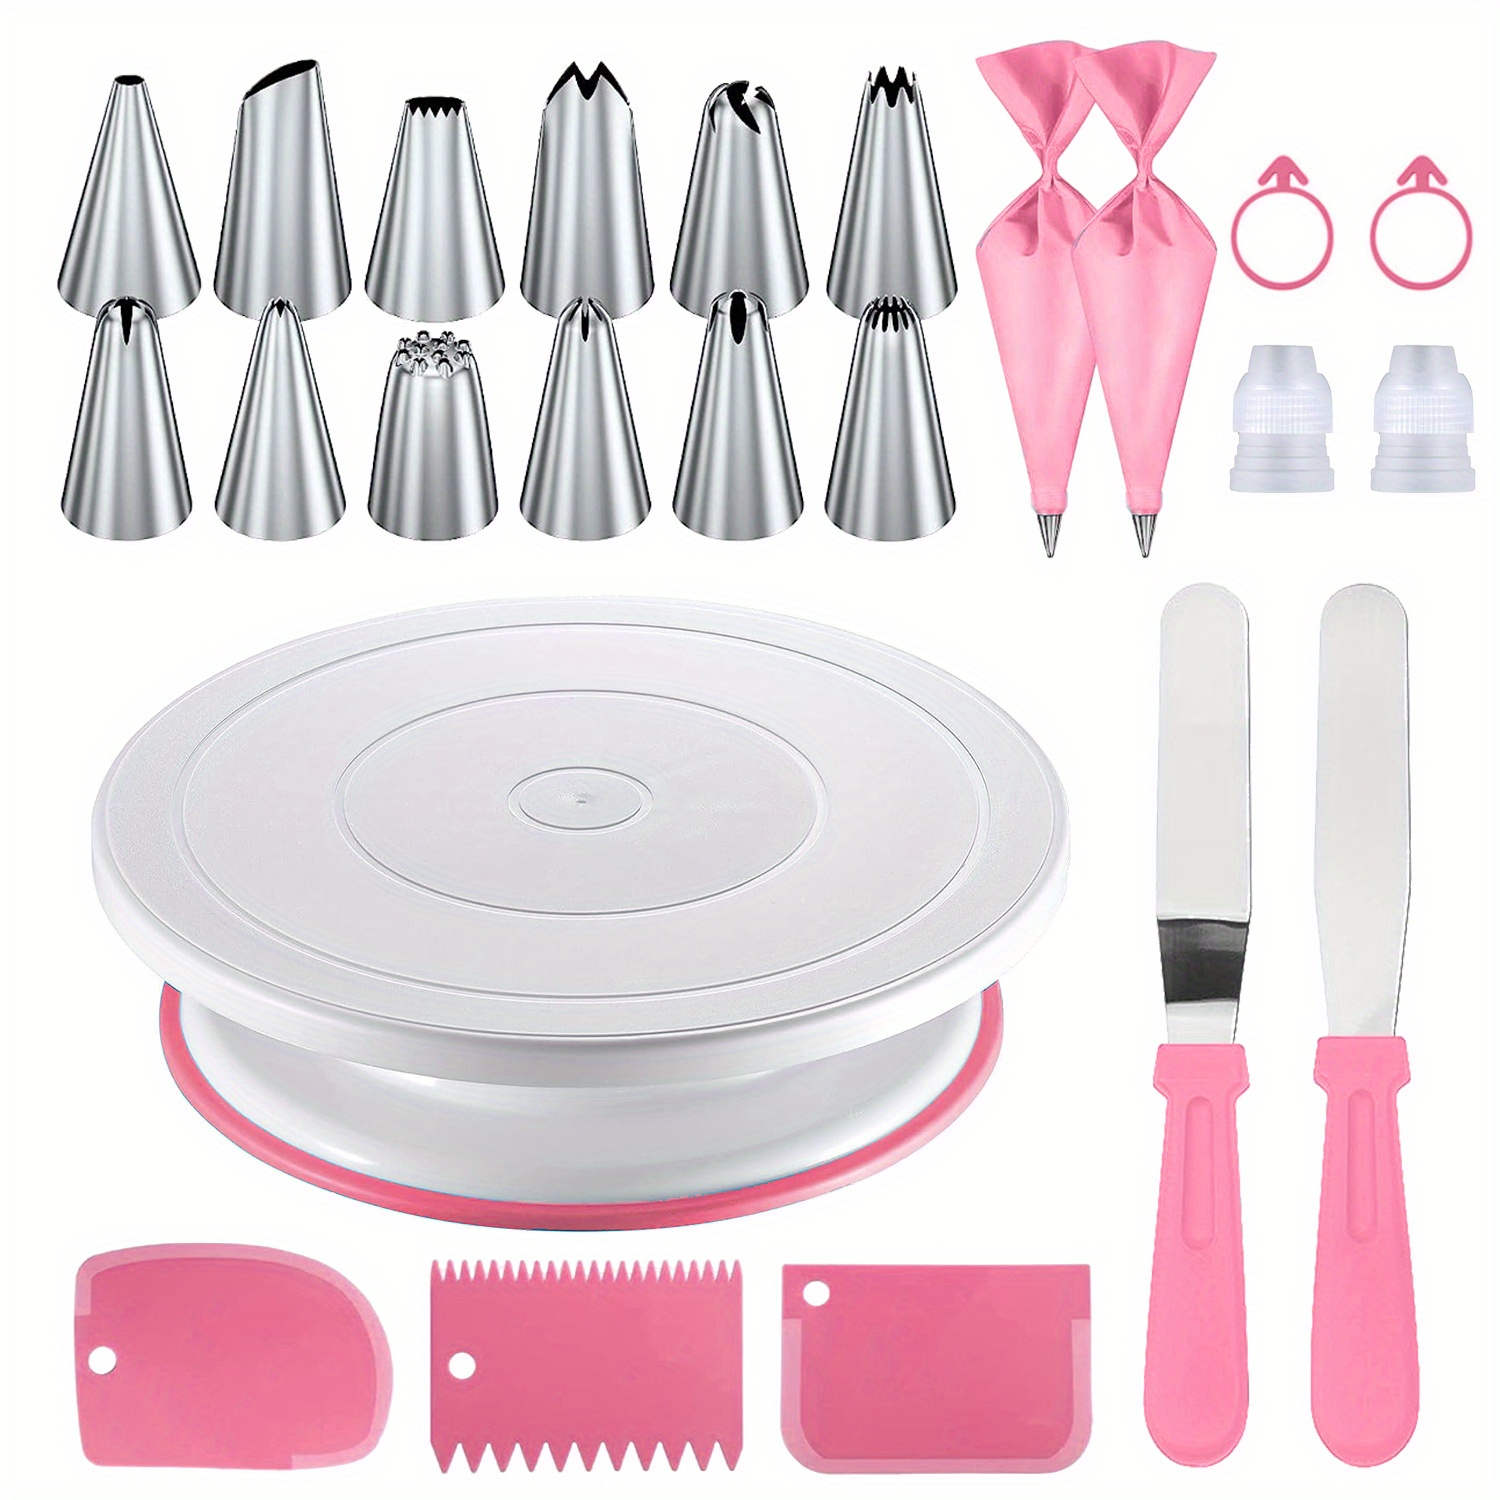 Cake Decorating Supplies Kit Tools 301pcs, Nifogo Baking Accessories with  Cake Turntable, Pastry Piping Bag, Piping Icing Tips for Beginners